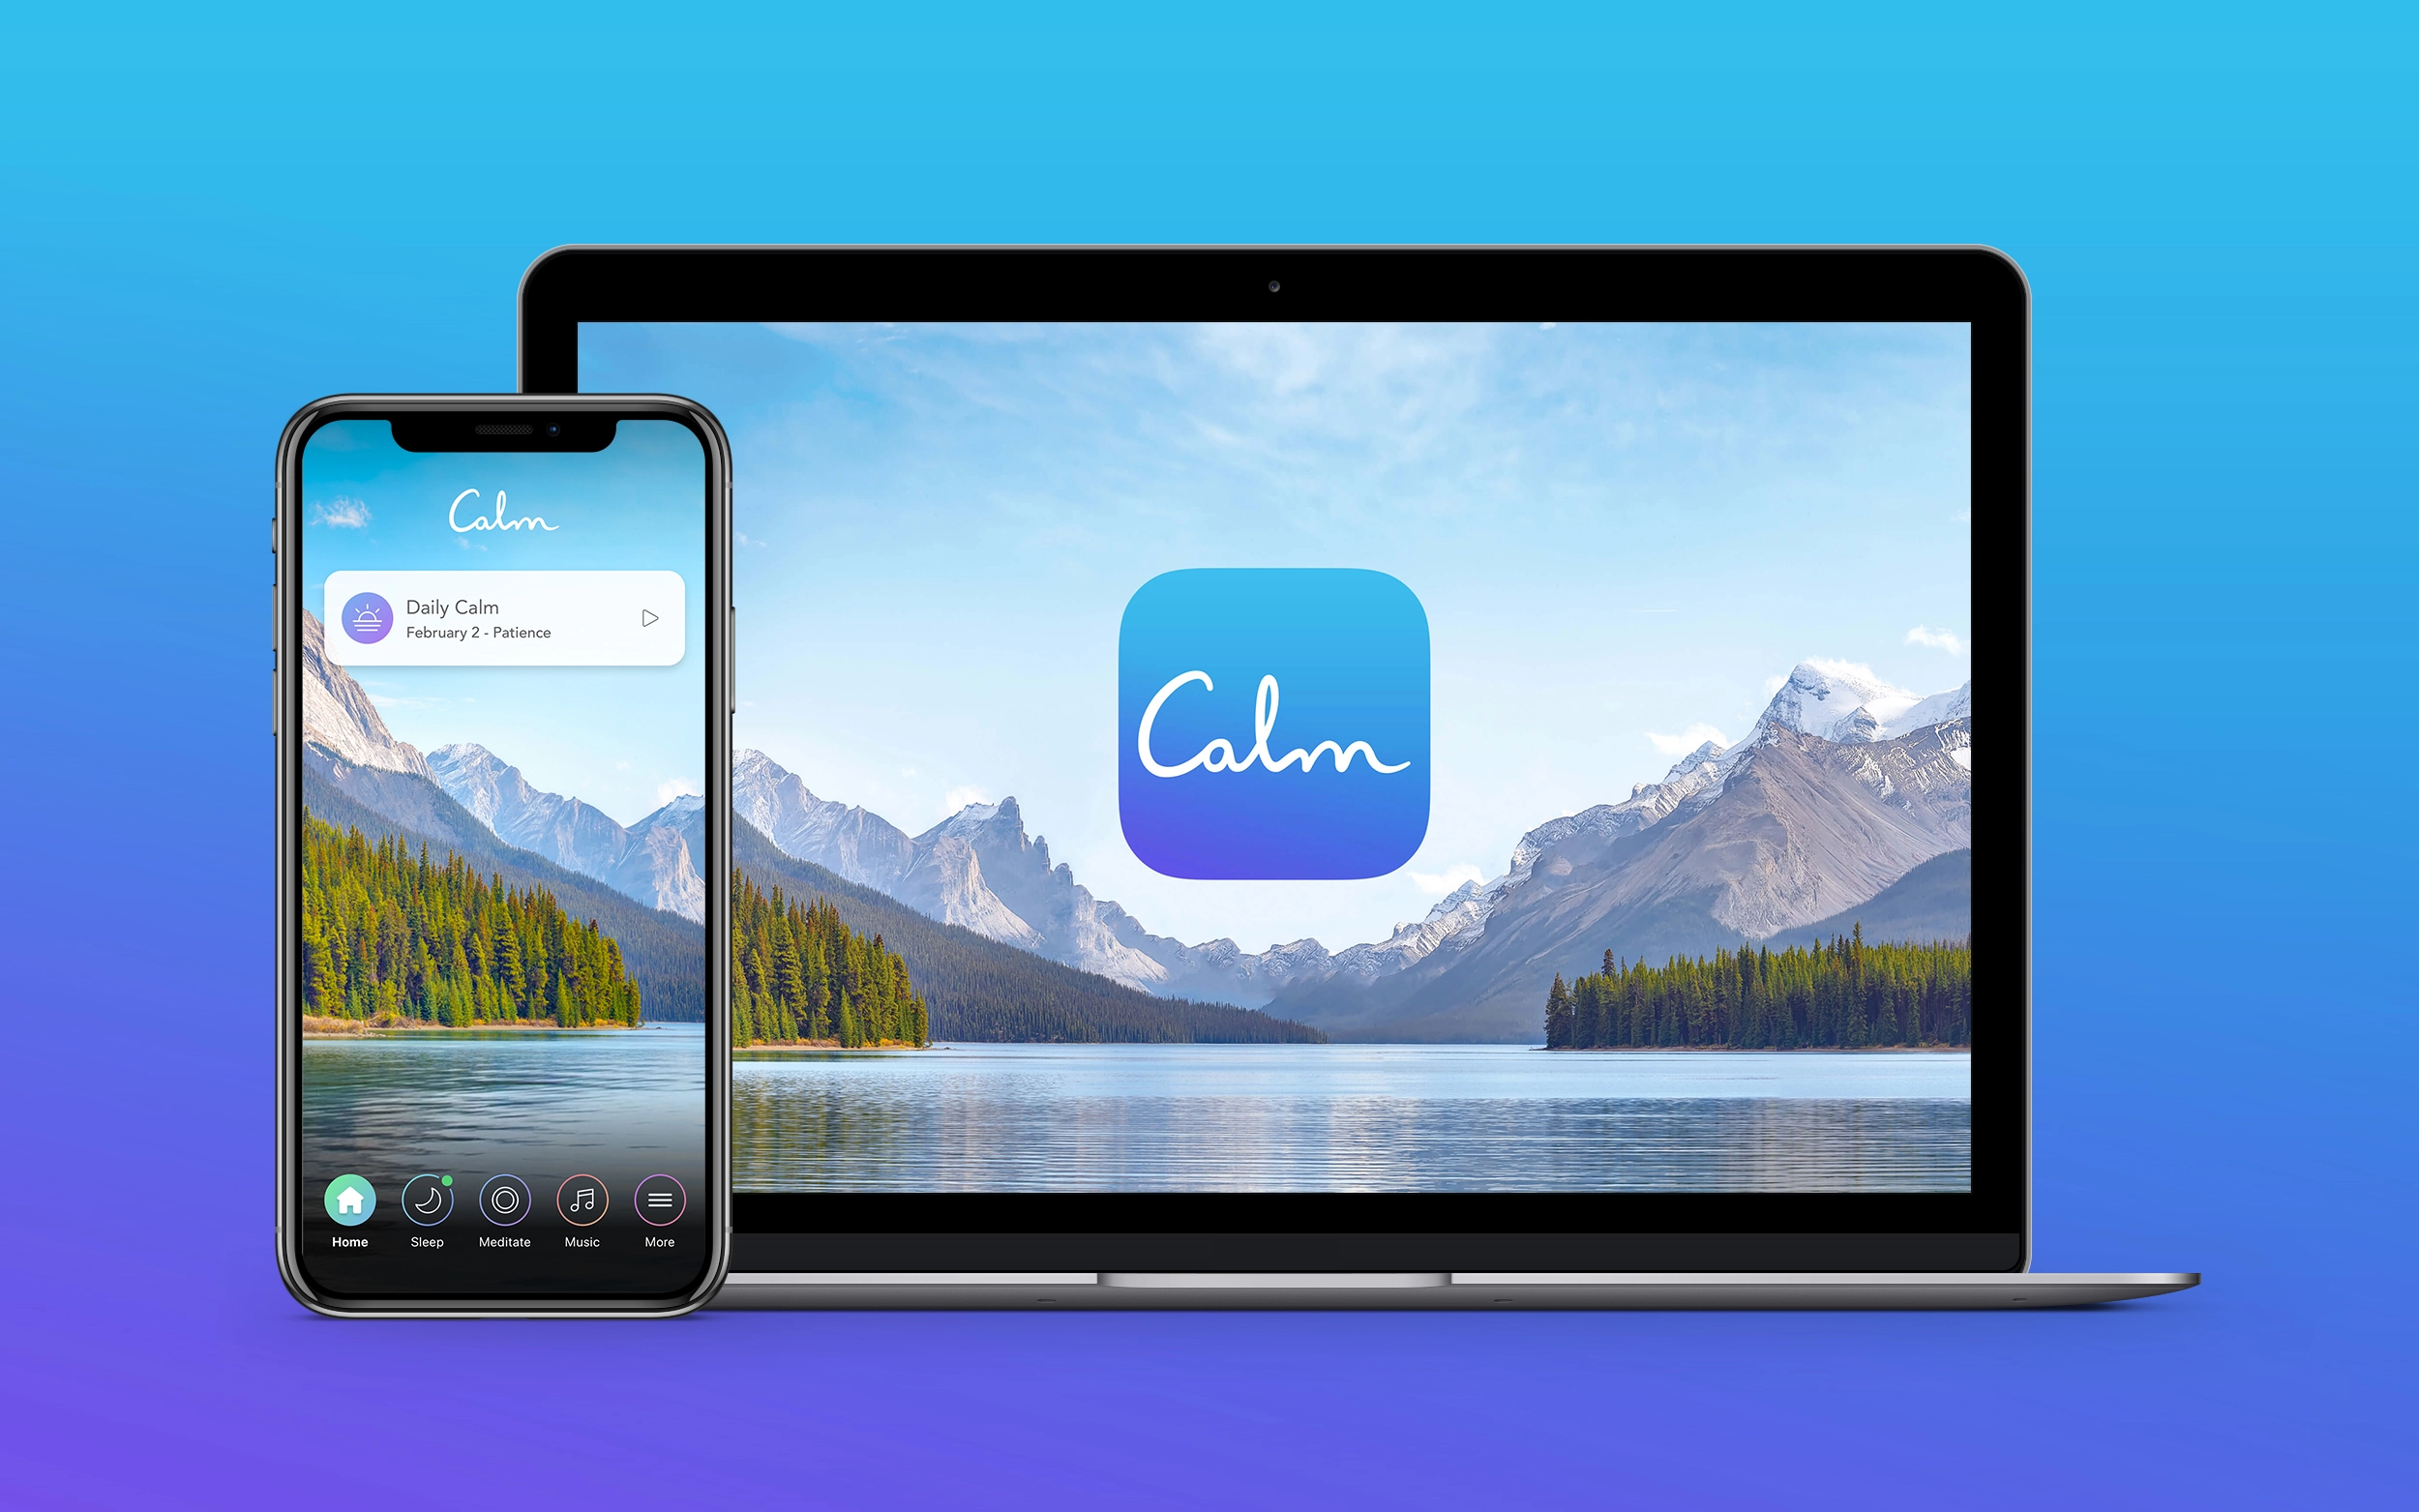 Calm Premium - 3 Months Trial Subscription Key (ONLY FOR NEW ACCOUNTS), 0.8 usd